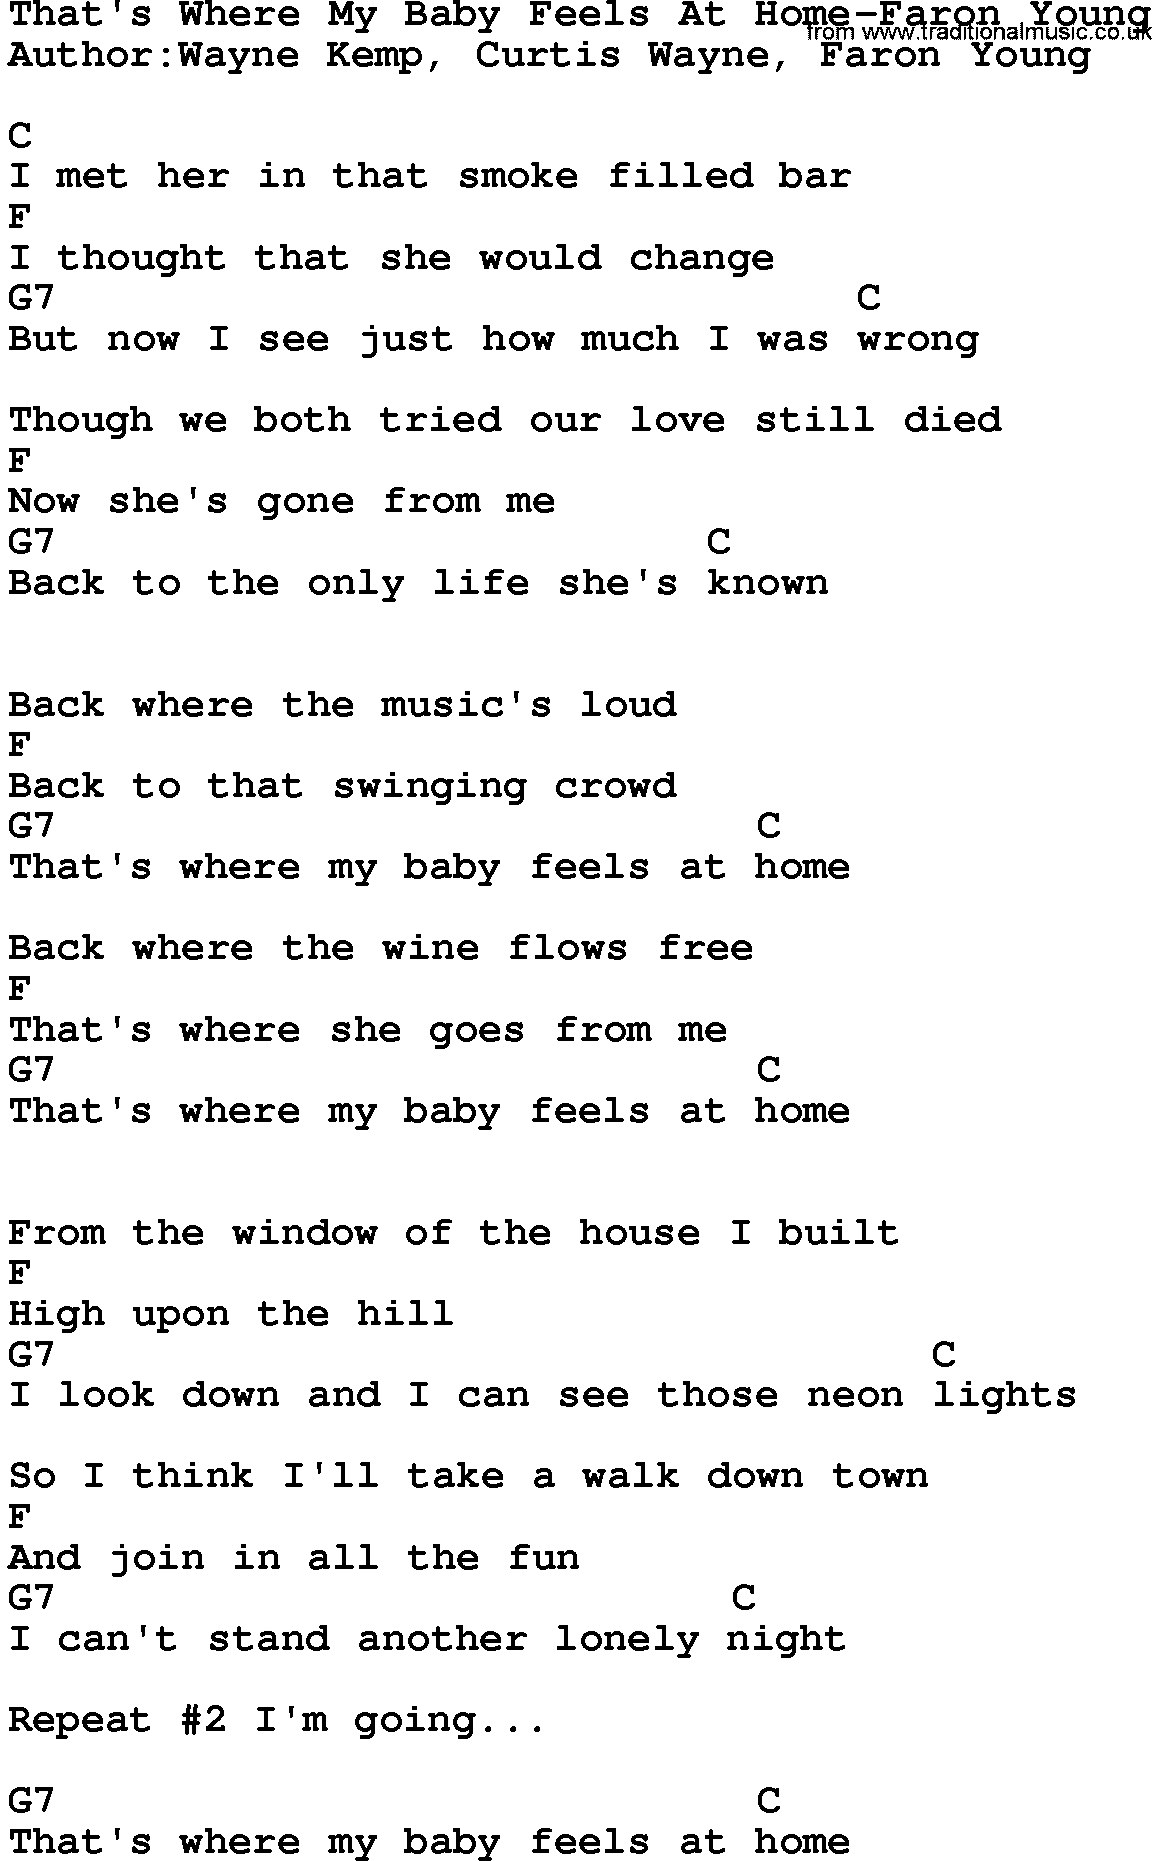 Country music song: That's Where My Baby Feels At Home-Faron Young lyrics and chords